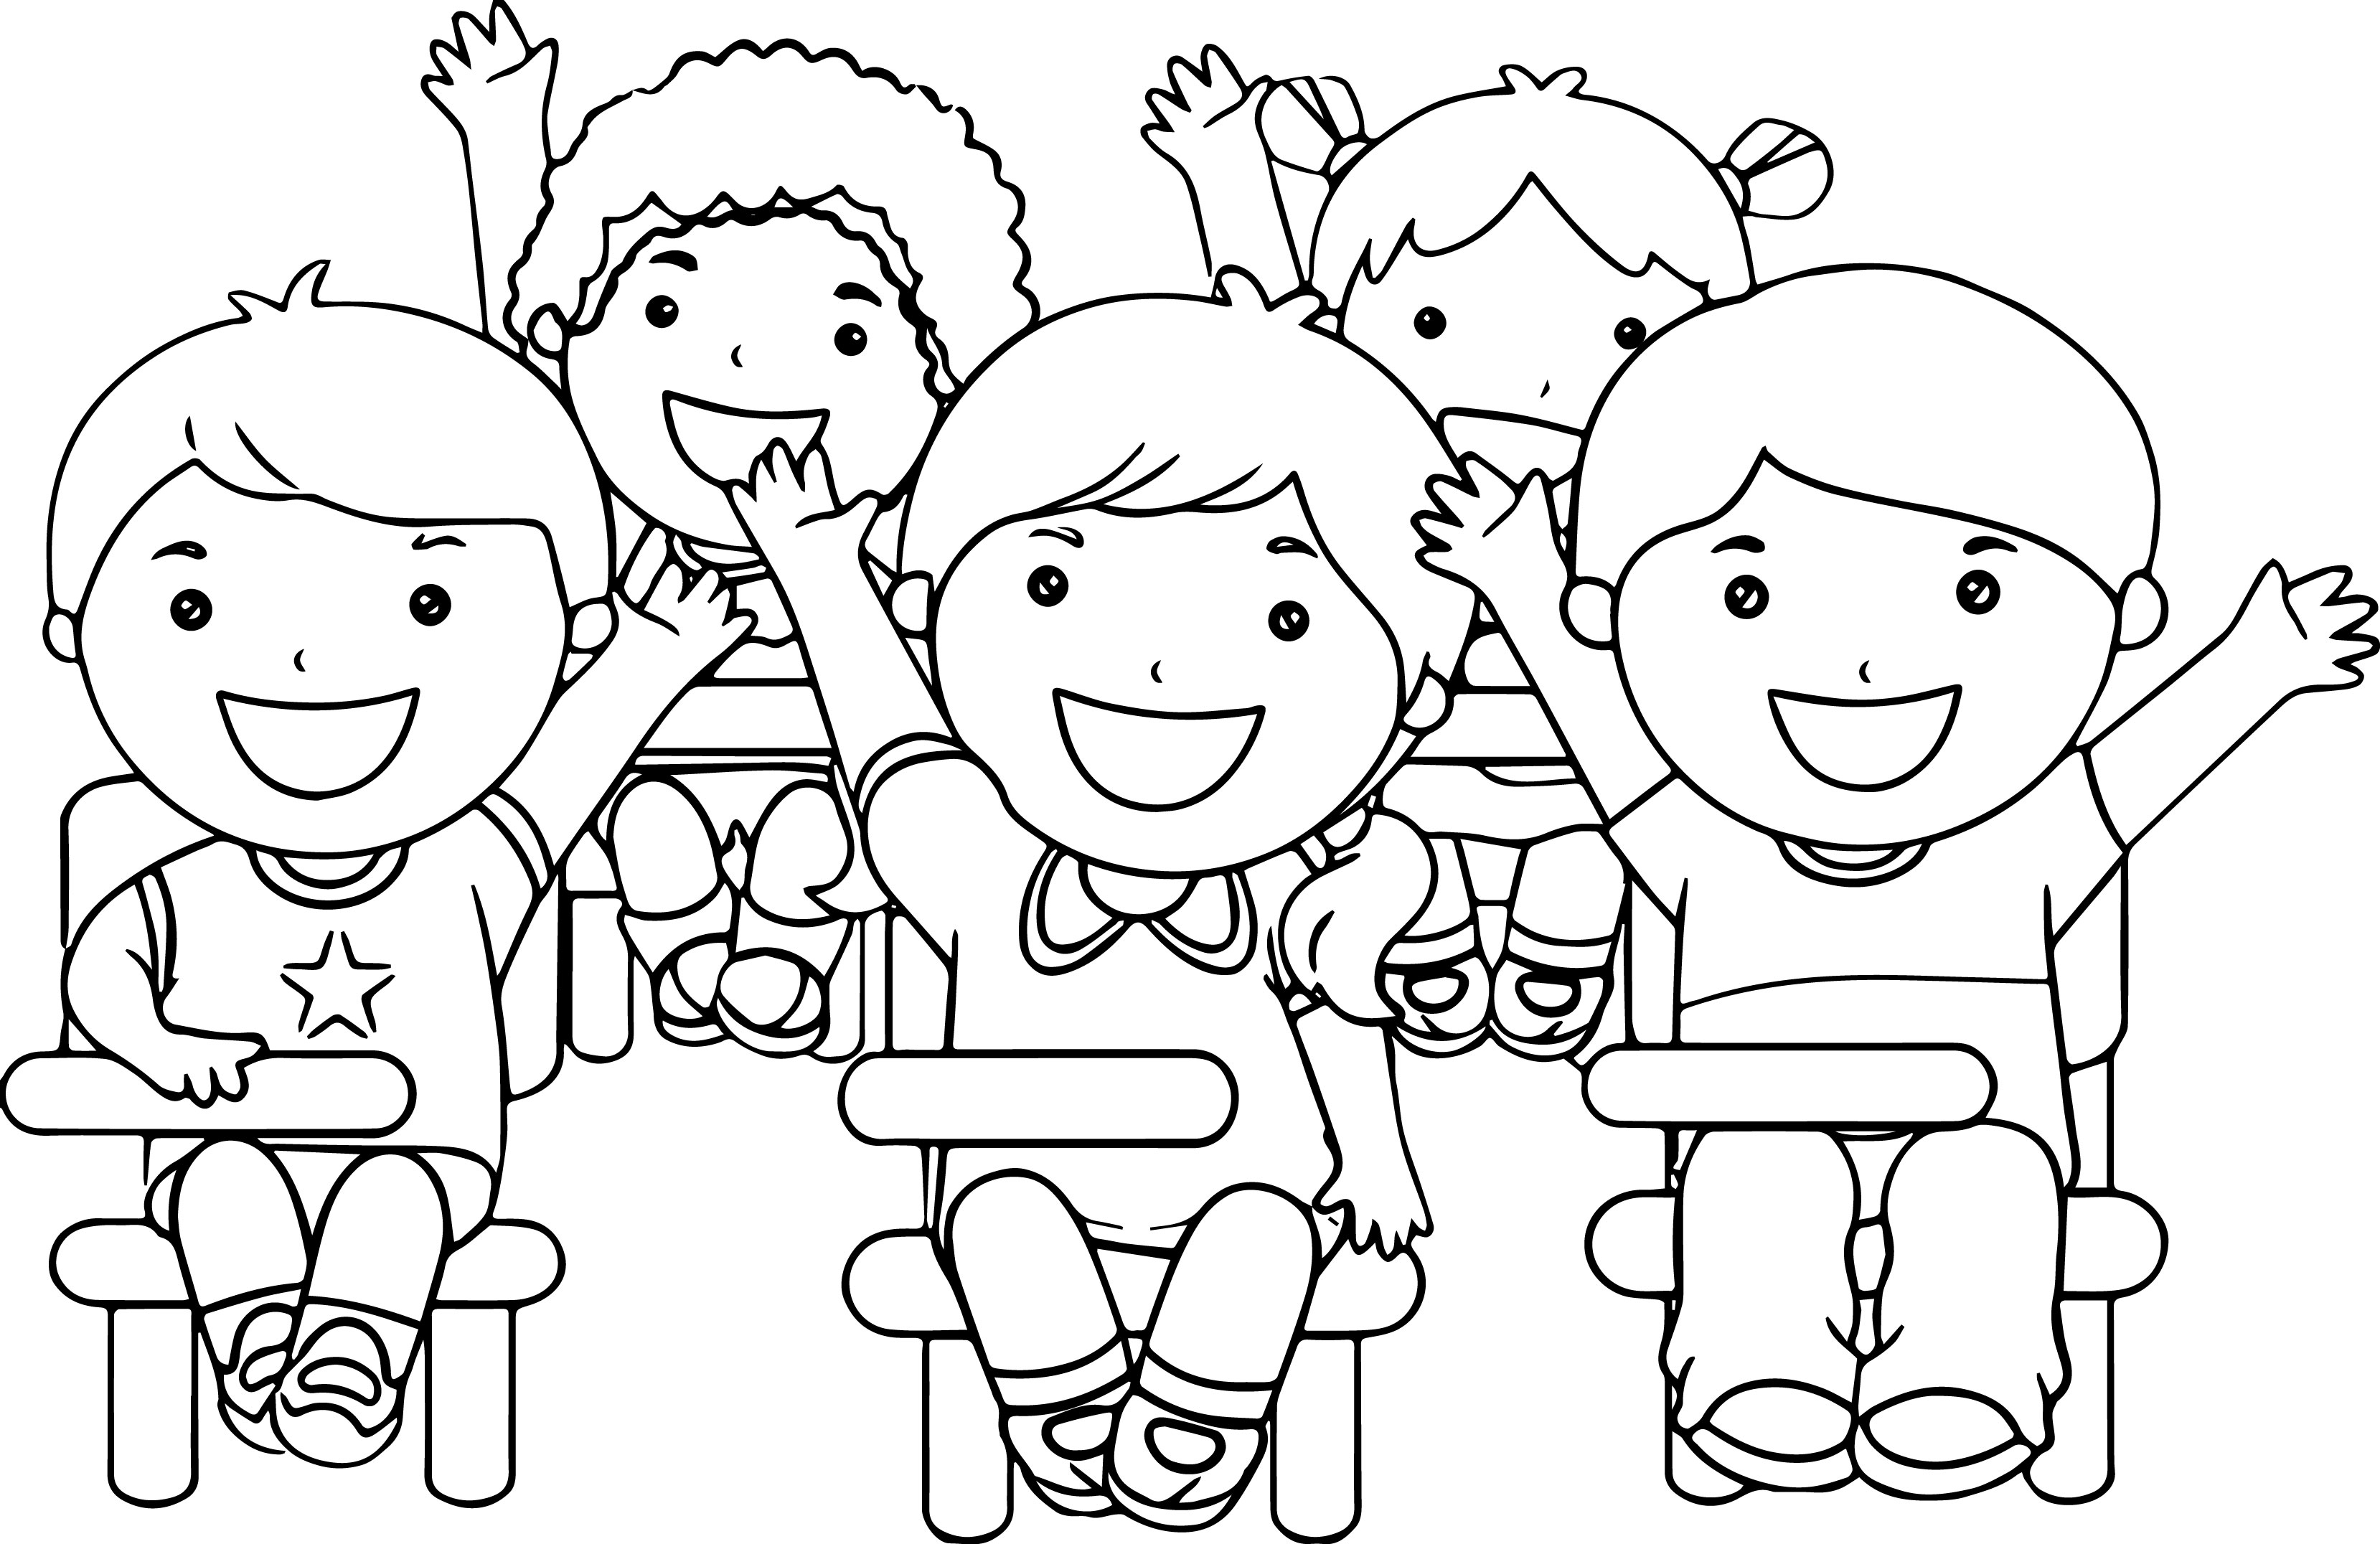 School Age Coloring Pages at GetColorings.com | Free printable